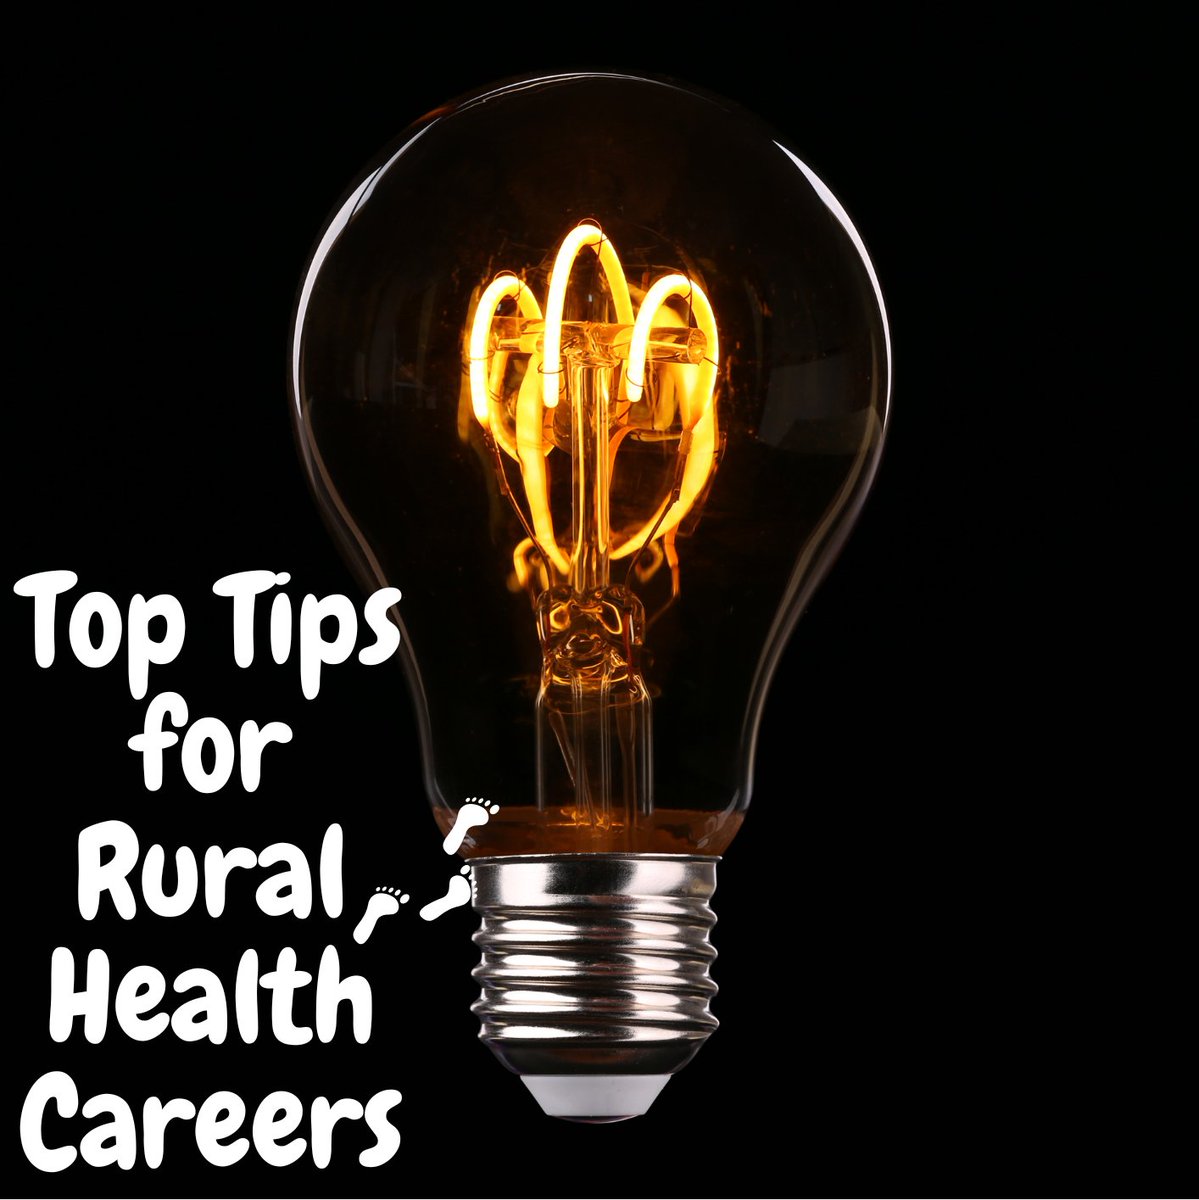 🚨New episode🚨
Listen to insights from our guests on top tips for people thinking about a rural health career.
#RR2H #ruralhealth #ruralhealthcareers #ruralcommunities 

sites.libsyn.com/457074